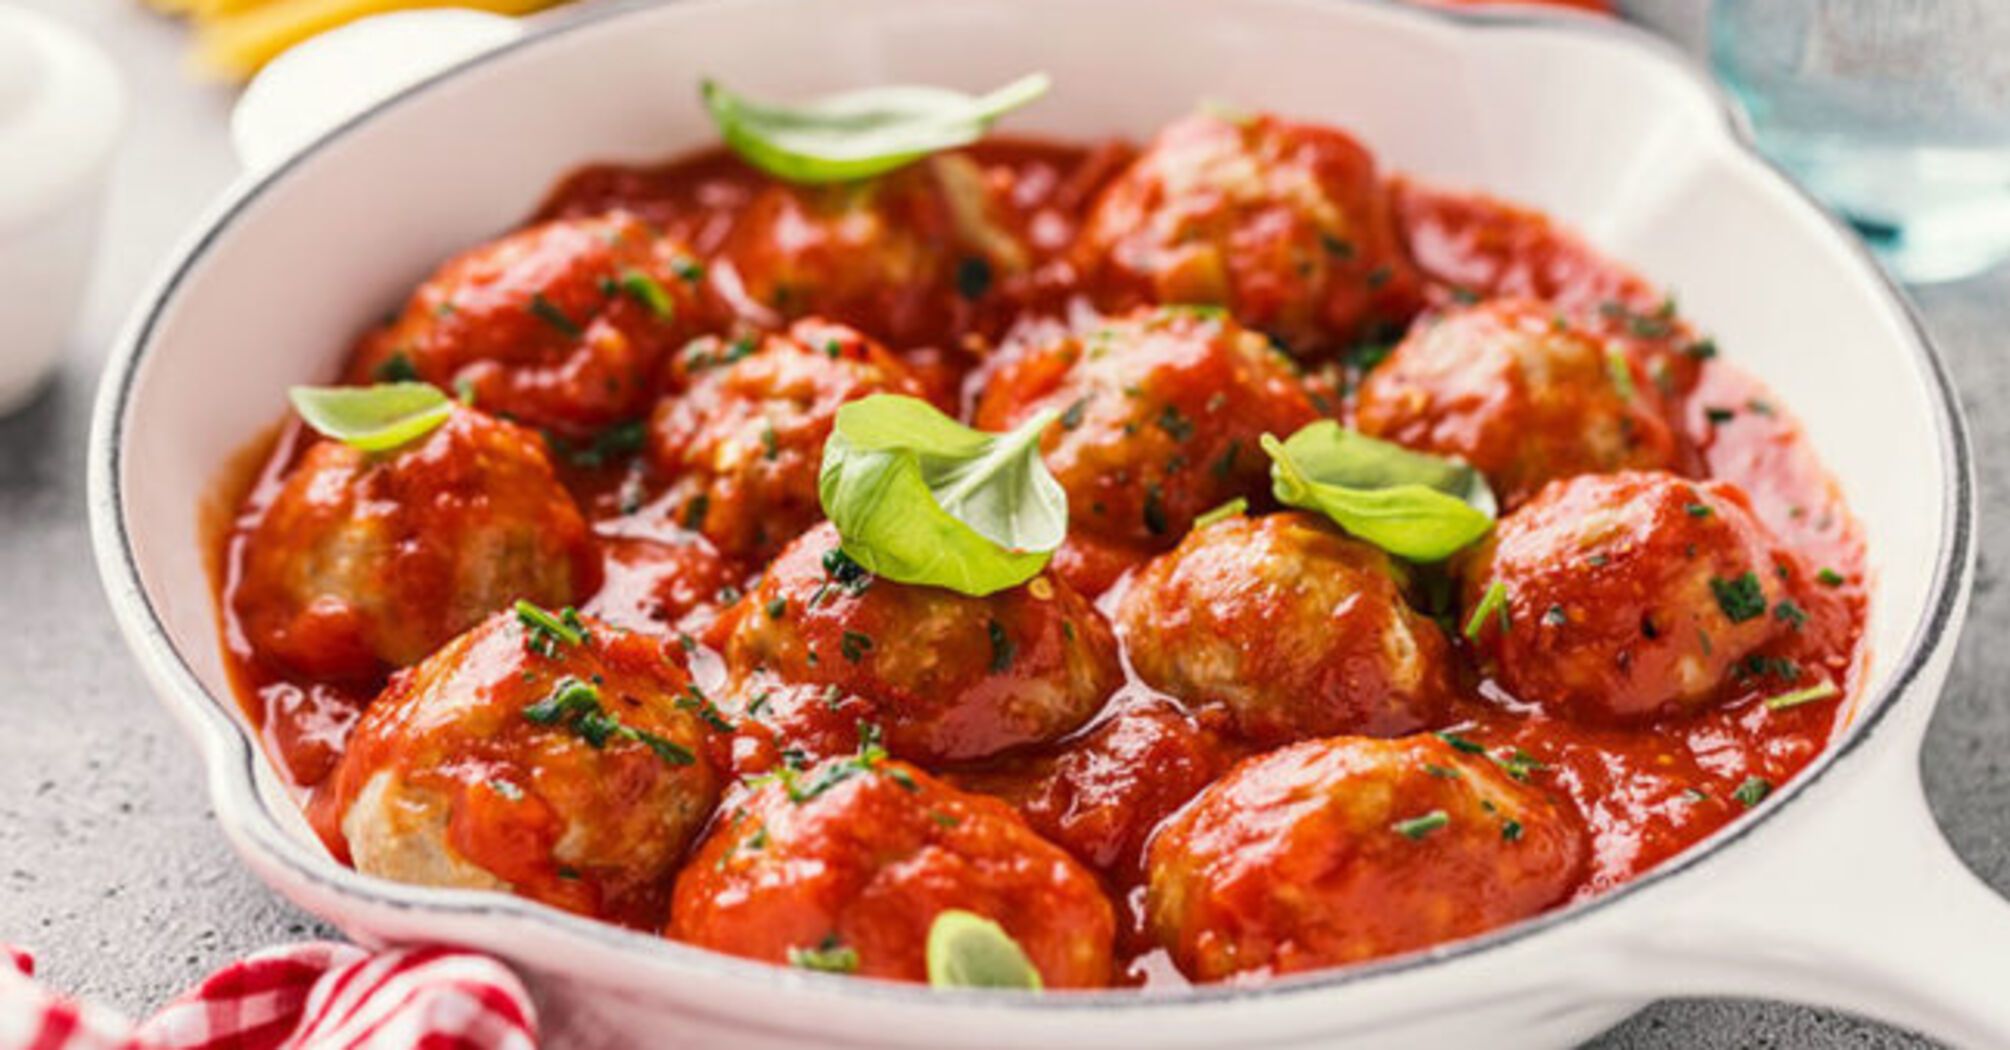 Juicy meatballs for pasta, porridge or potatoes: a must-have for dinner